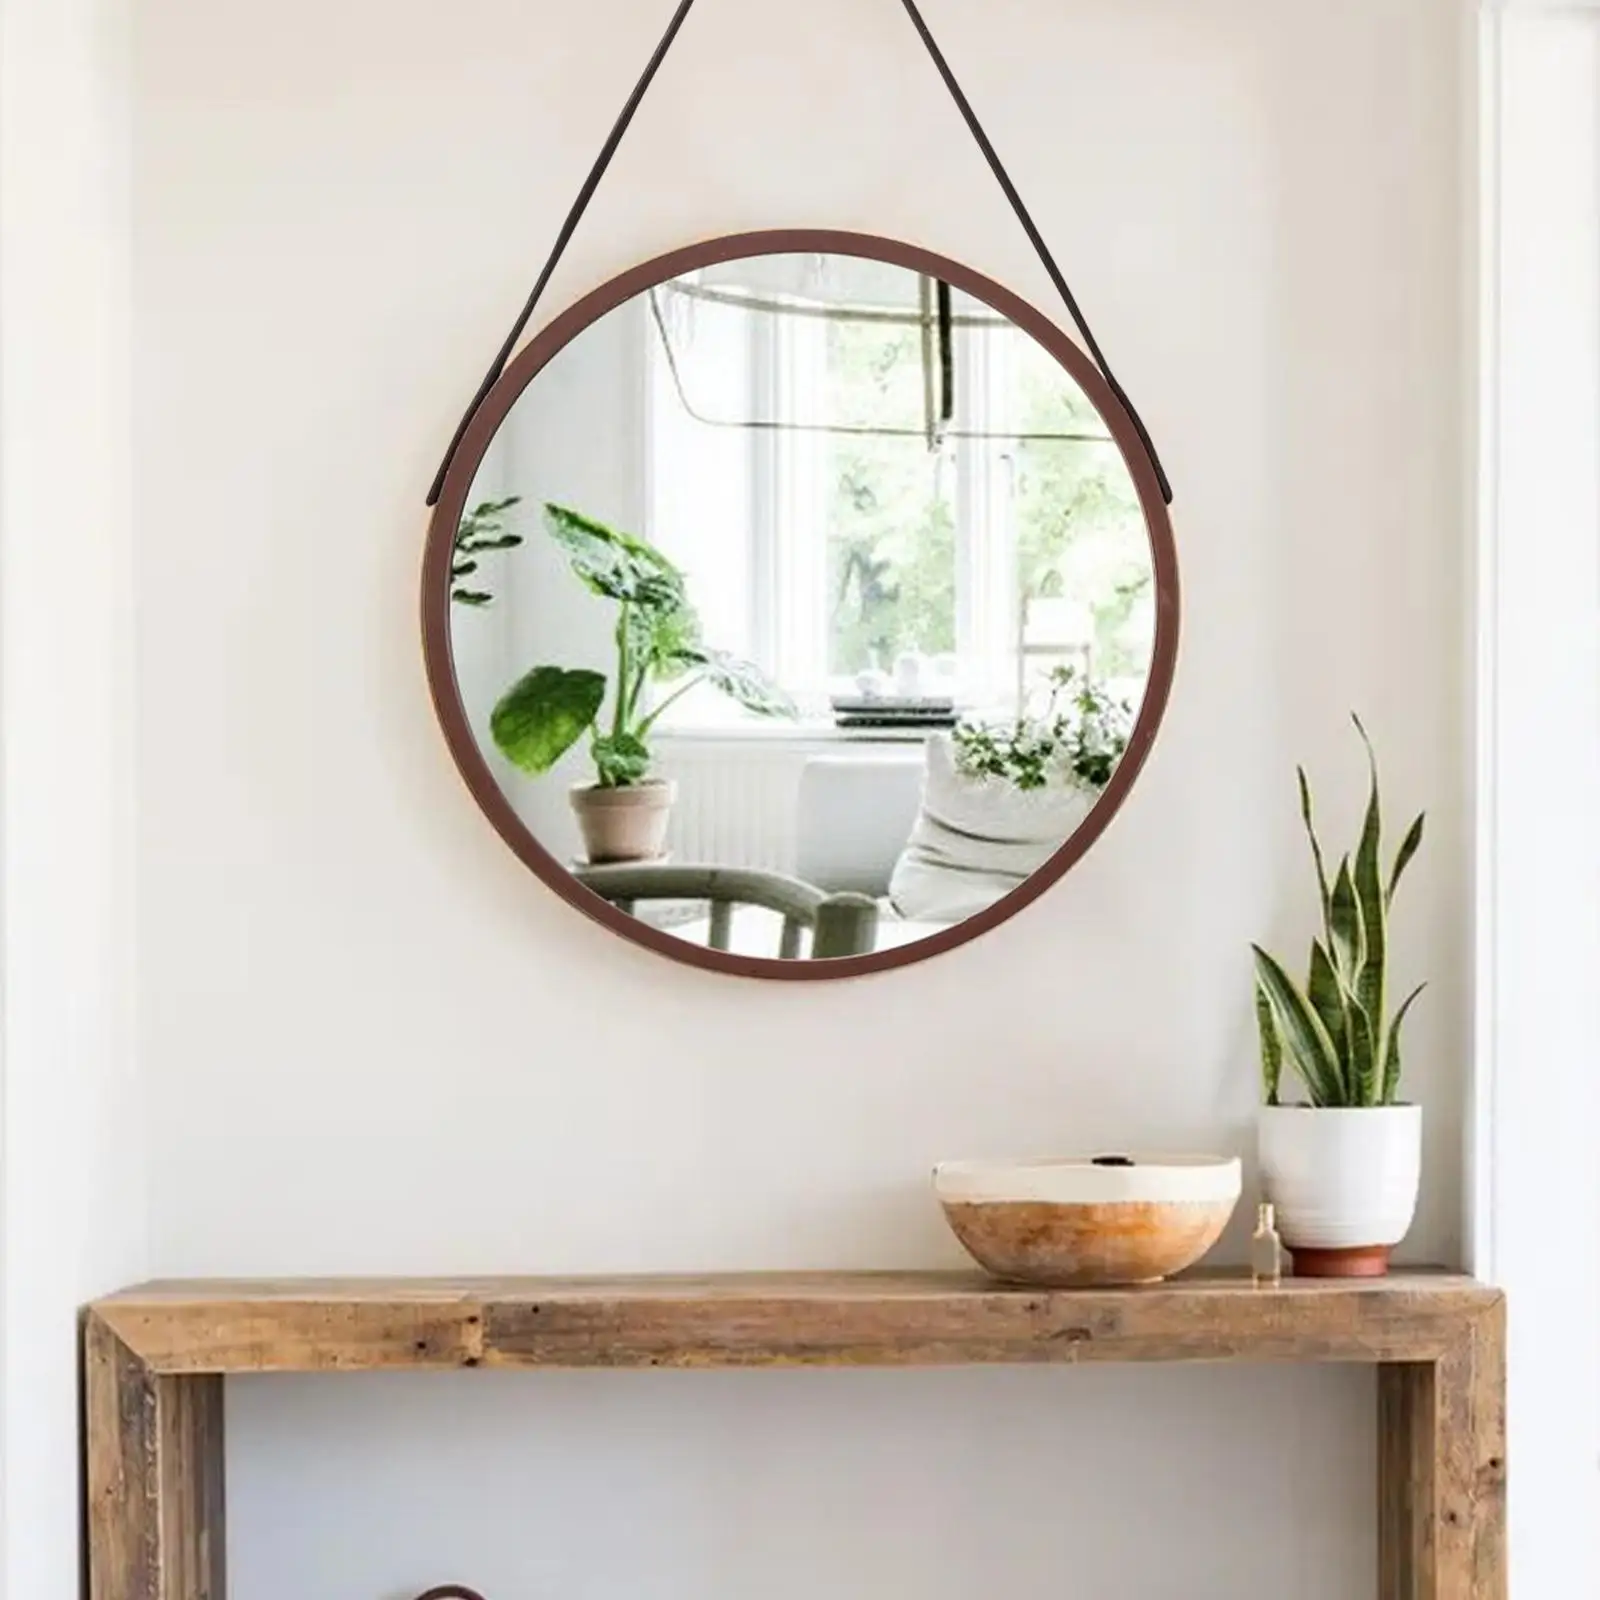 Hanging Mirror Wall Mounted Wood Framed Ornament Makeup Mirror  Circle  for Entryway Dresser Bathroom Dorm Decor